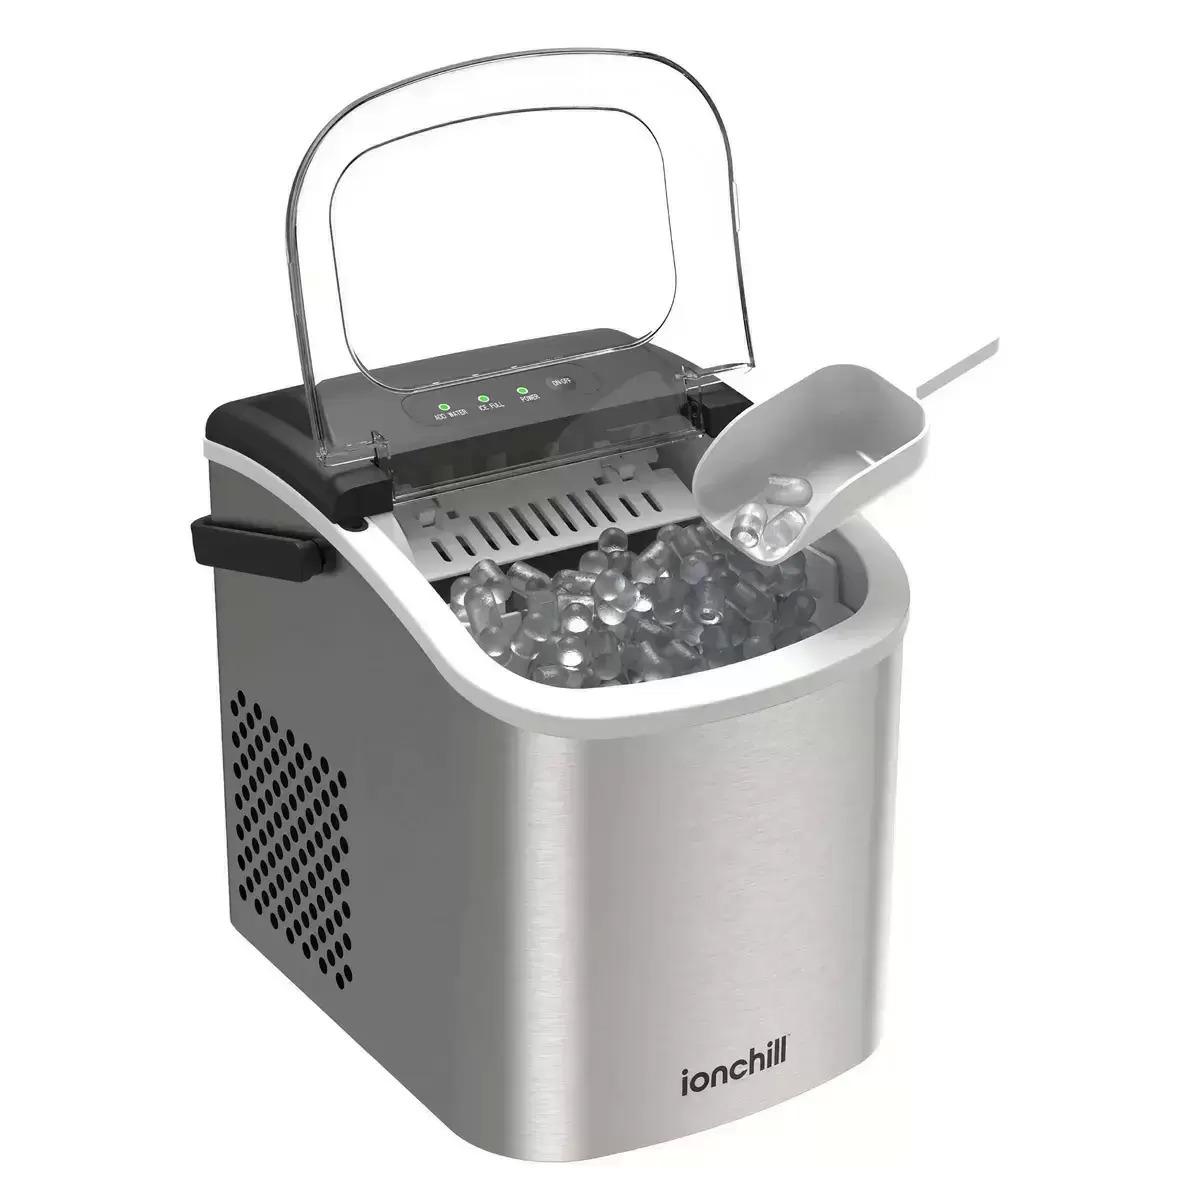 Ionchill Quick Cube Portable Countertop Bullet Ice Maker Machine for $68 Shipped